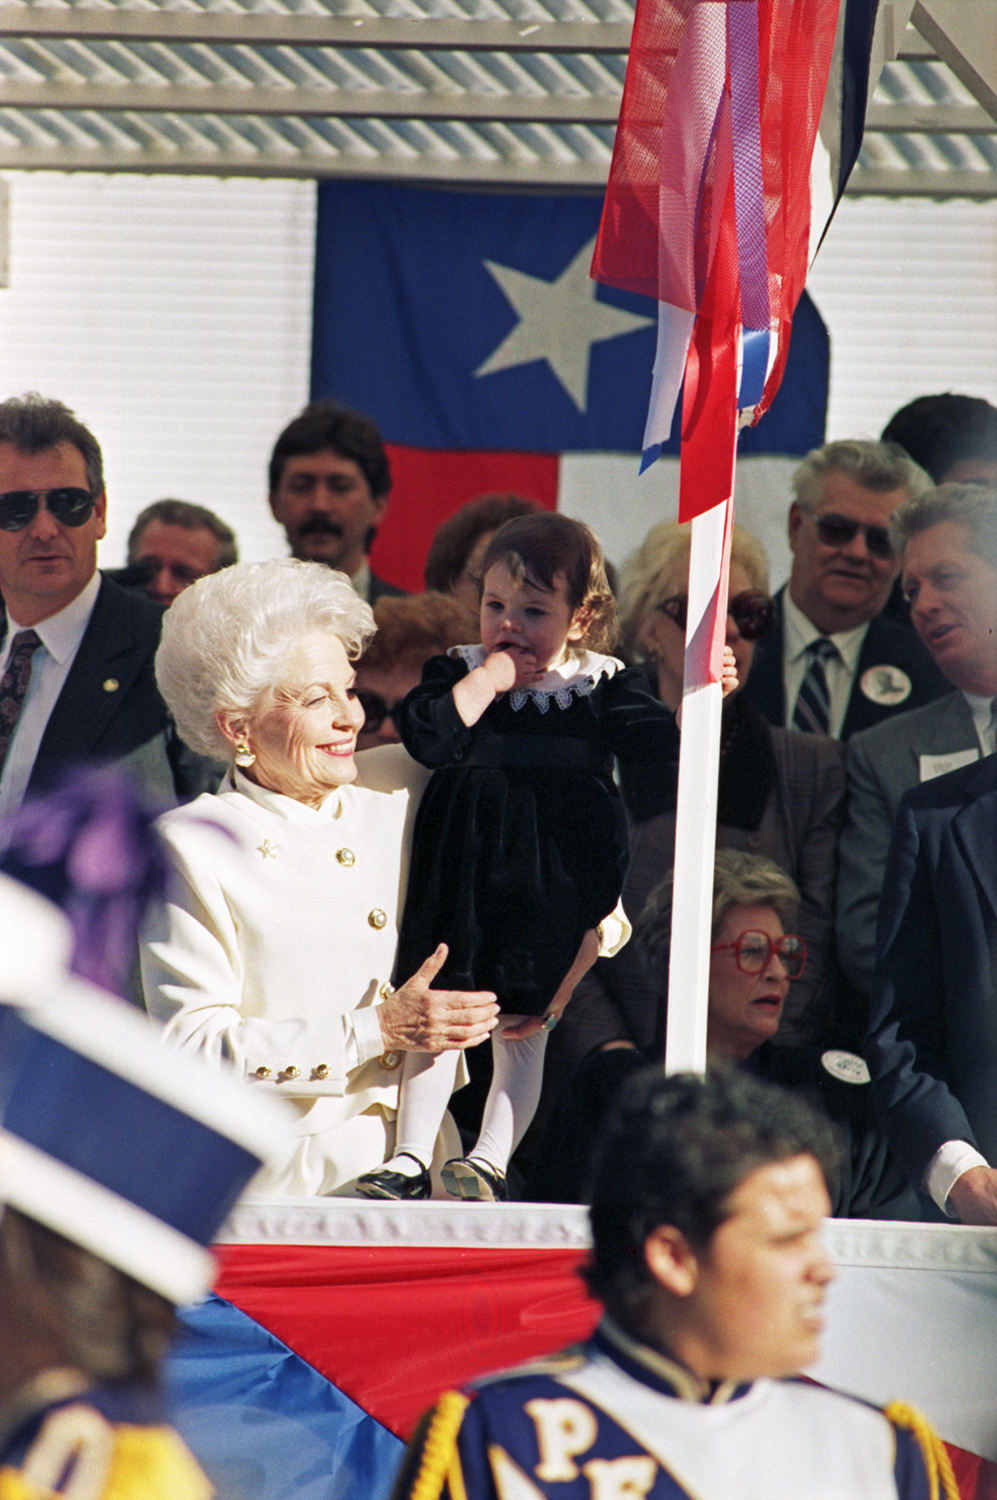 Inauguration of Texas Governor Ann Richards in Austin, Texas. Richards is seen holding her granddaughter (possibly Jennifer Richards) in front of the Texas State Capitol building.